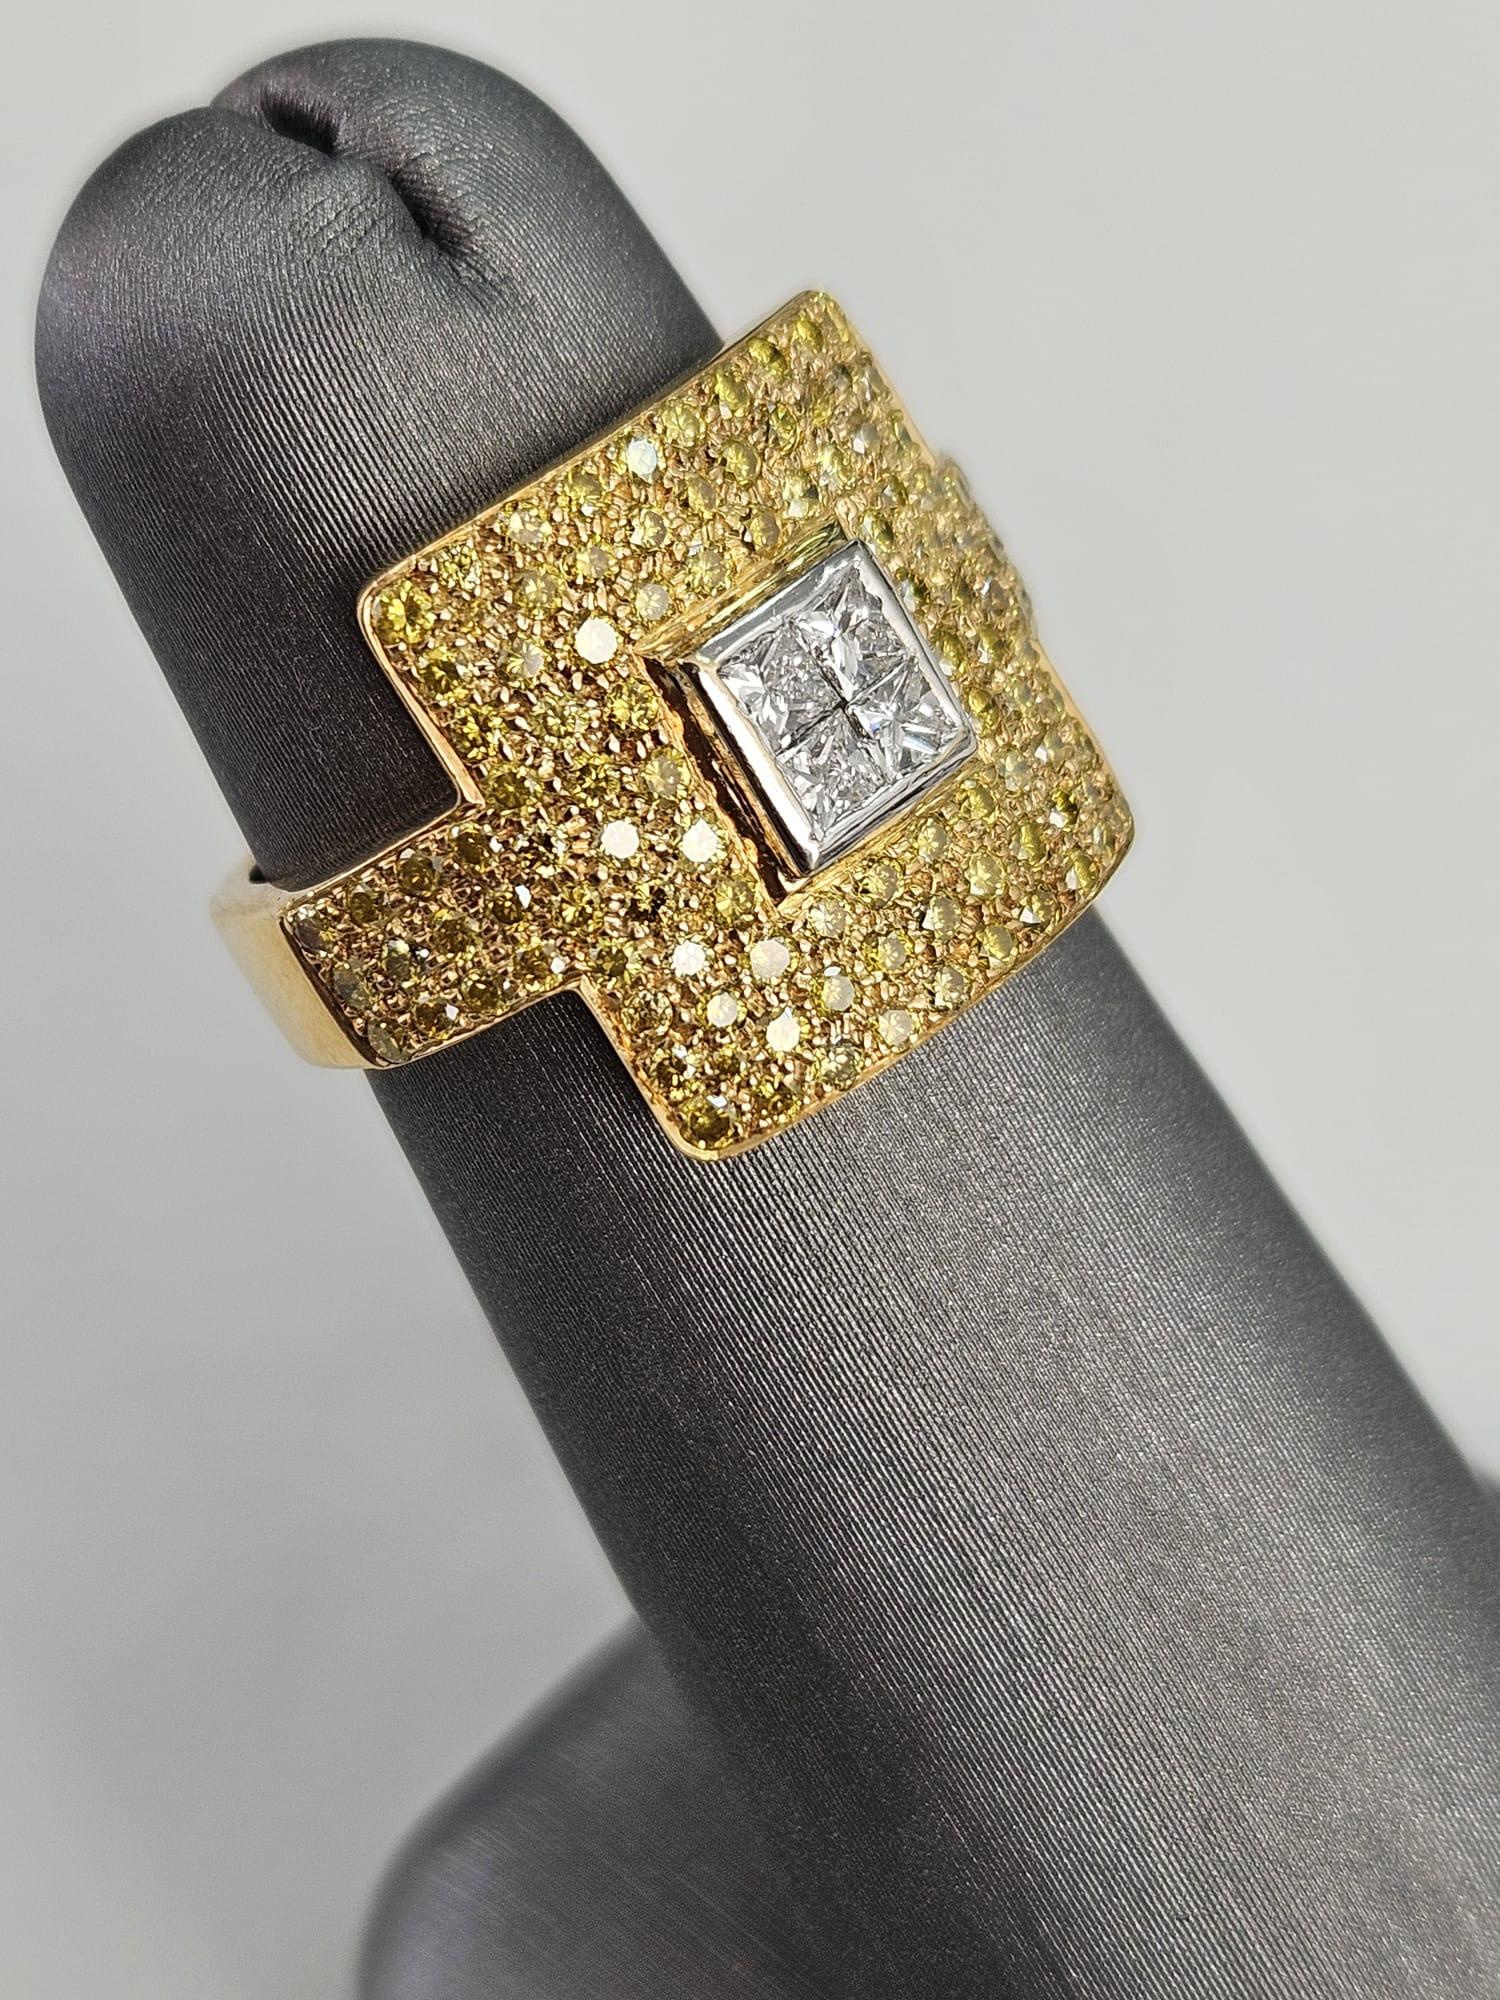 A mesmerizing 1.38 carat Canary Diamond band ring, where brilliance and elegance converge in a striking geometric dance. The centerpiece of this exquisite piece is a substantial 1.12-carat Canary Diamond, expertly shaped into a captivating large